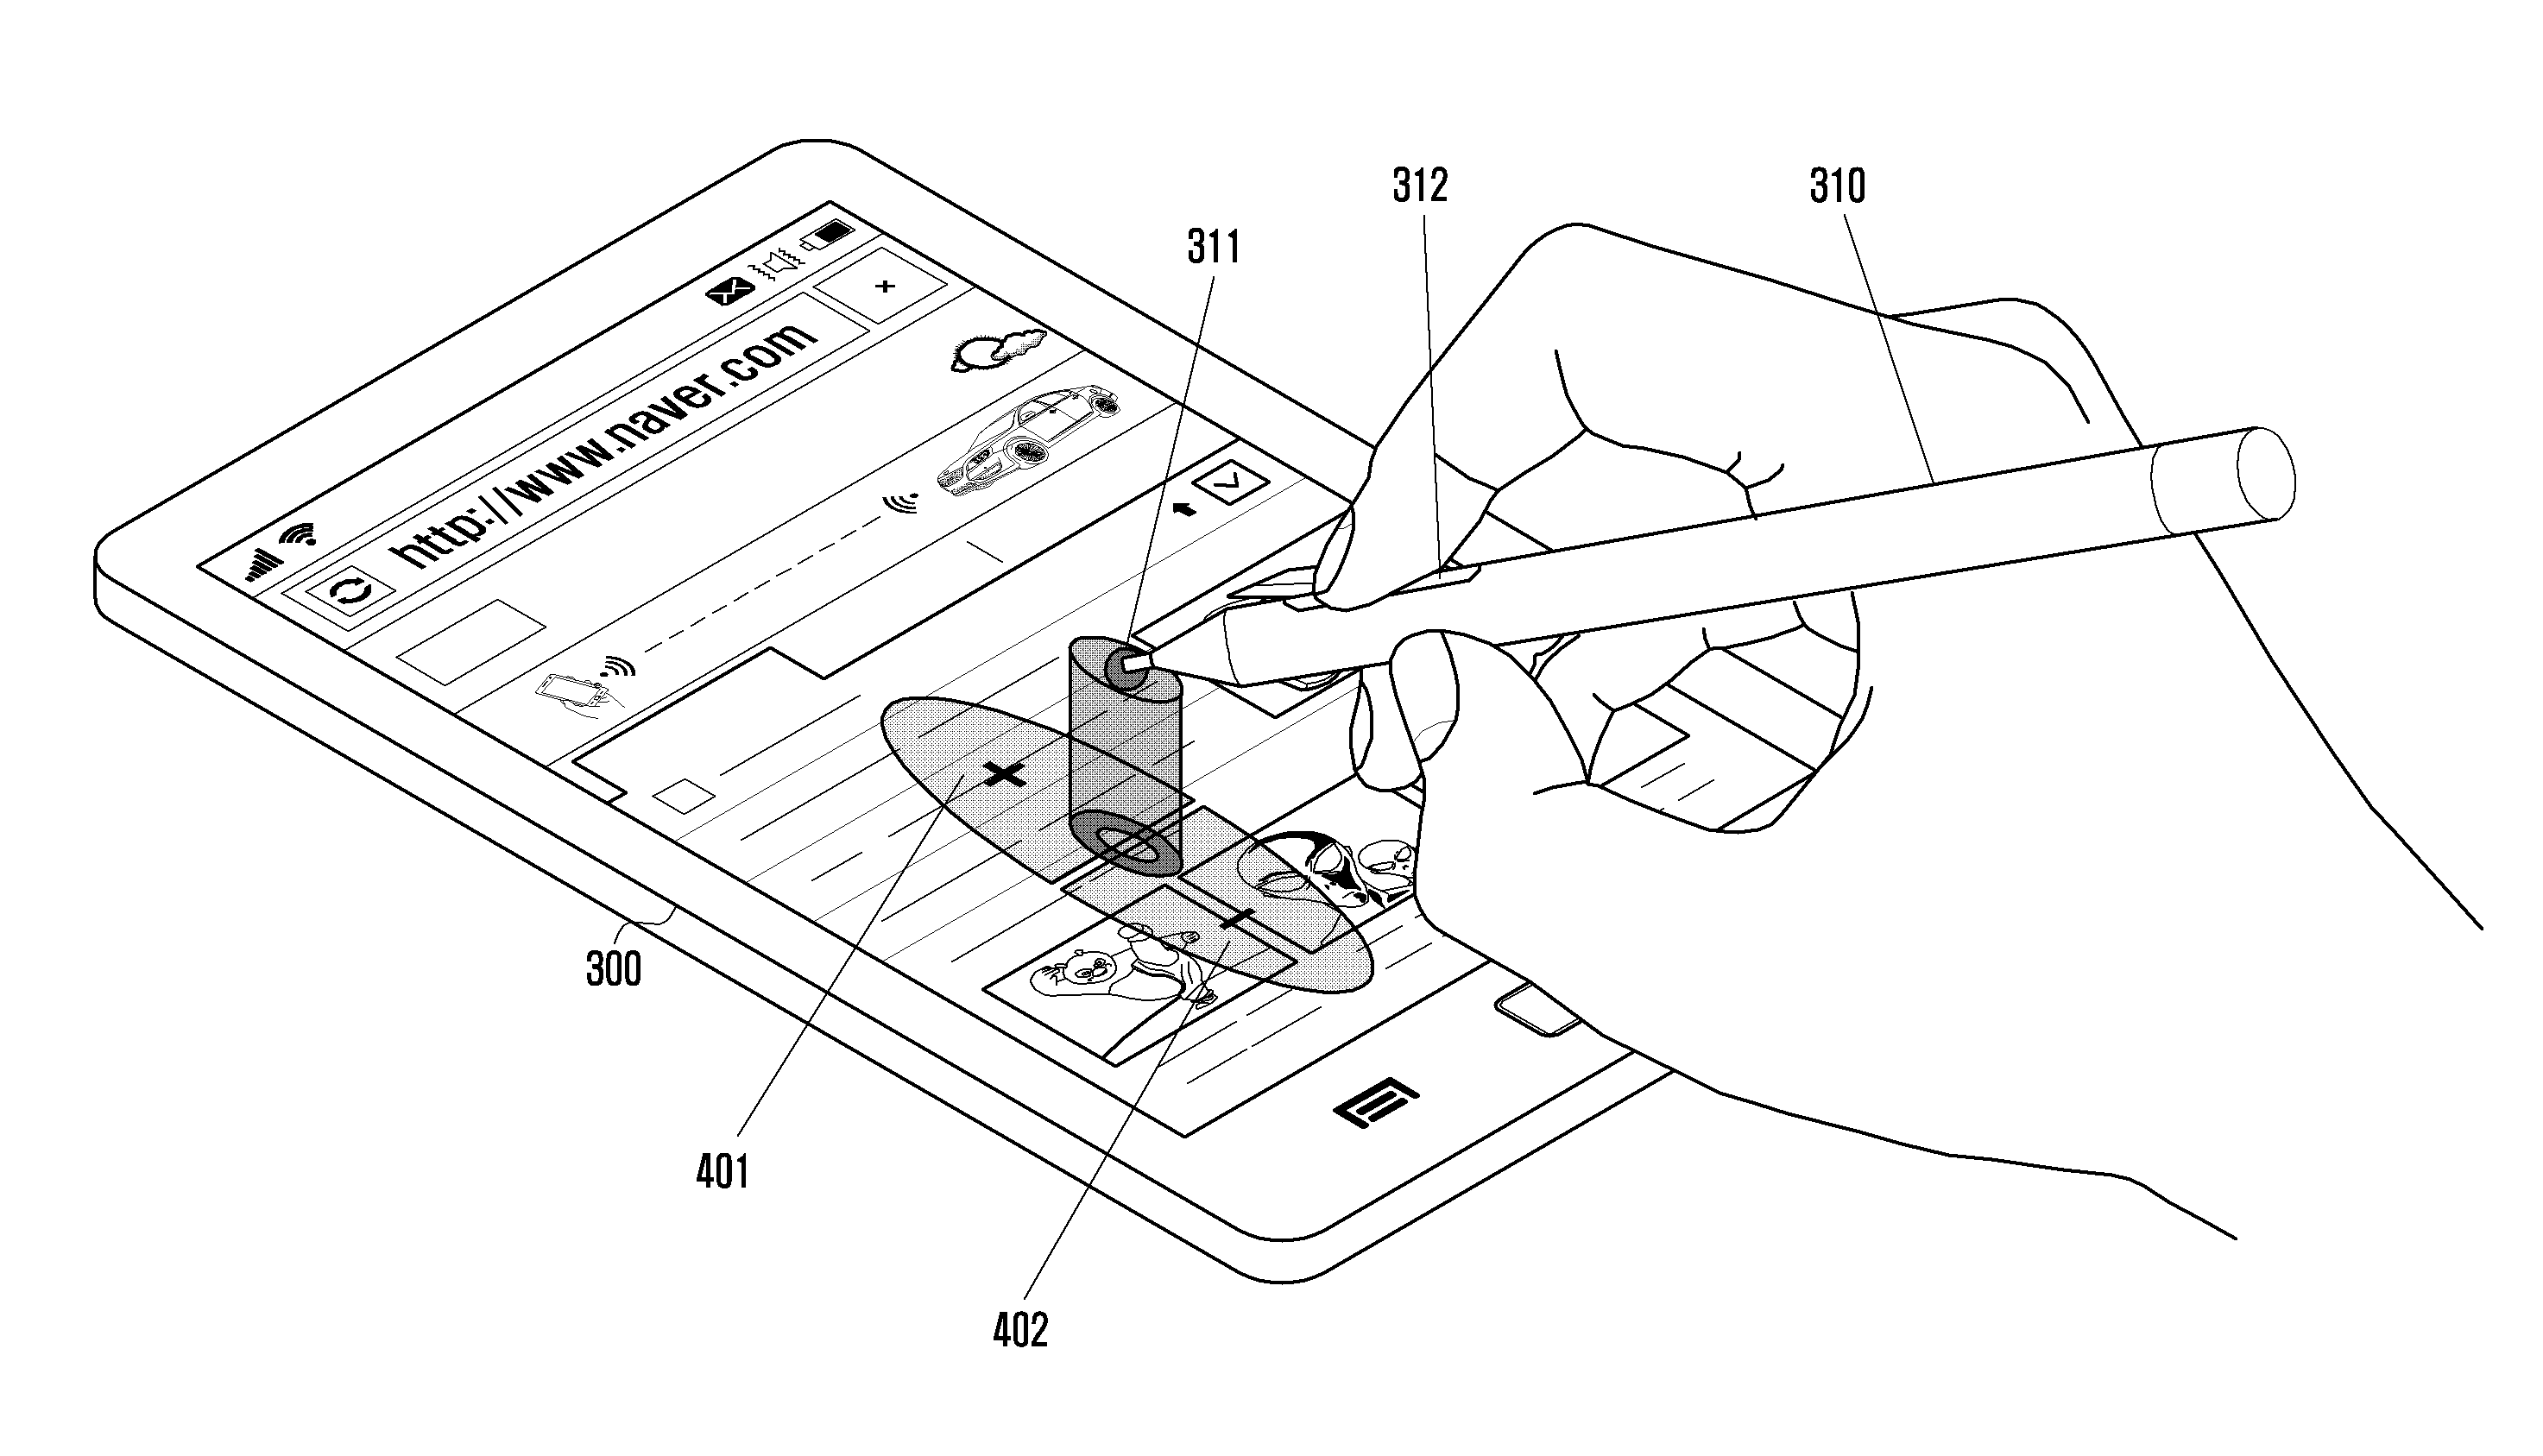 Enlargement and reduction of data with a stylus